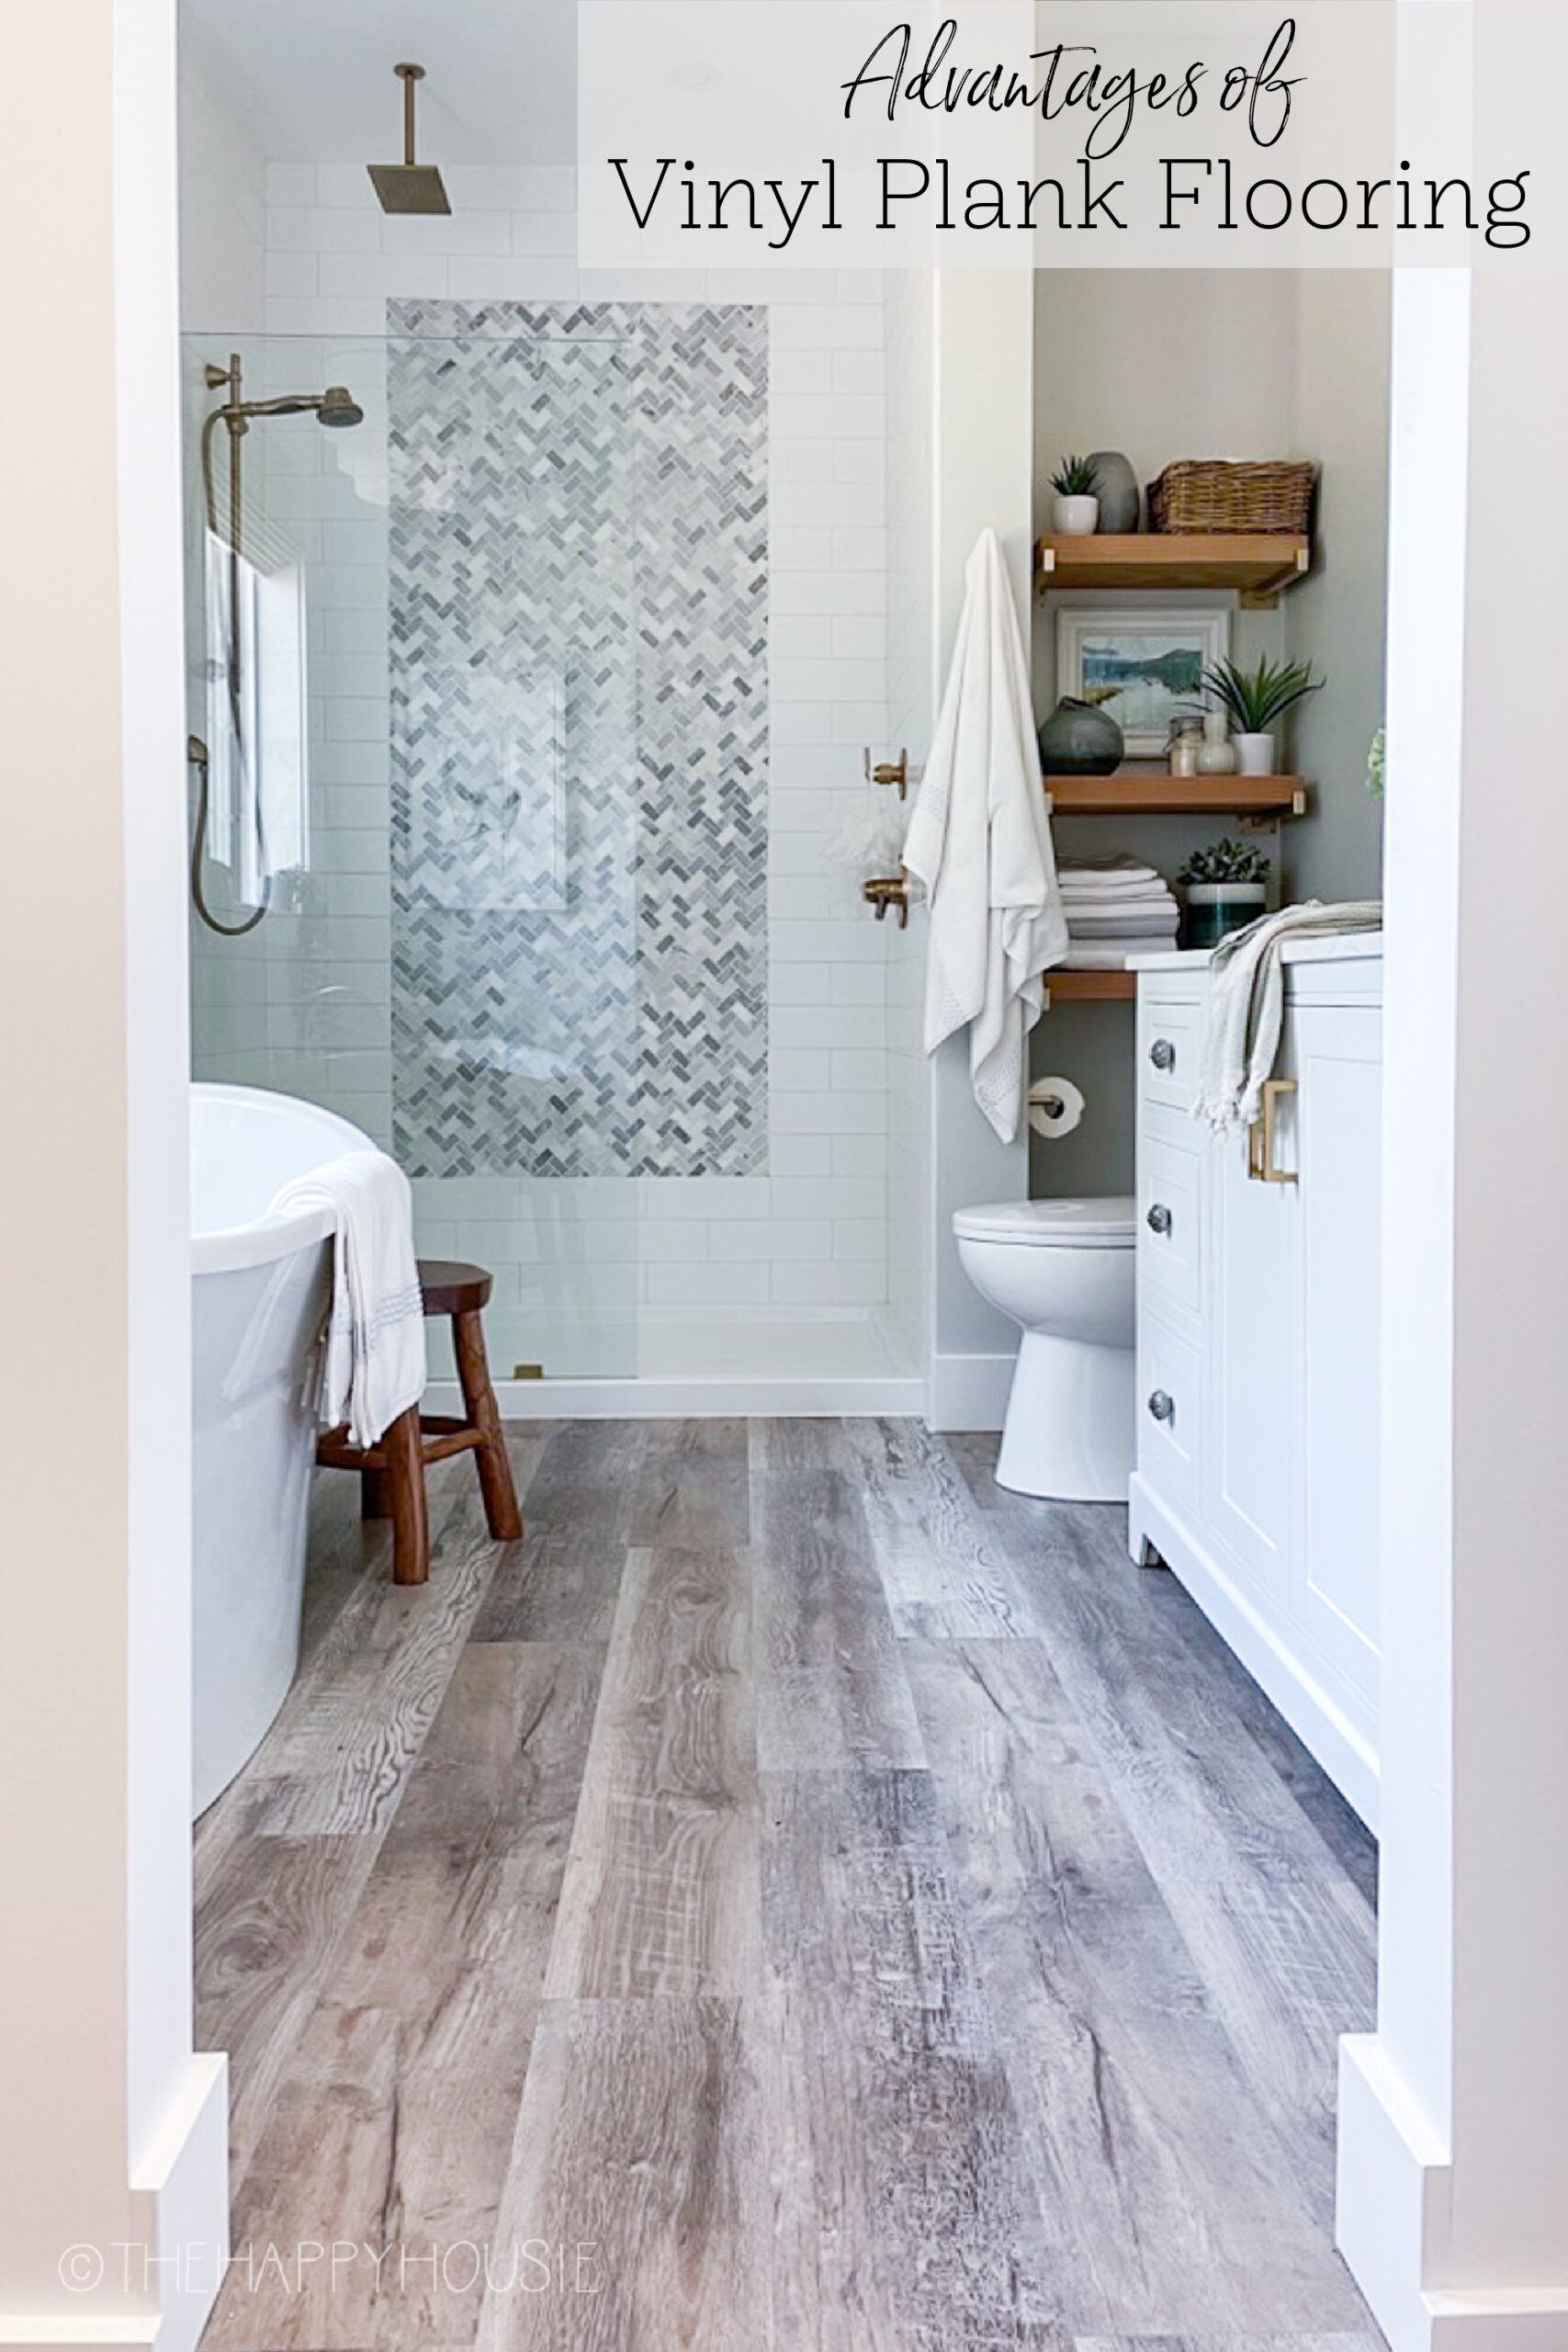 Why We Chose Vinyl Plank Flooring For, Can Vinyl Plank Flooring Be Used In A Bathroom